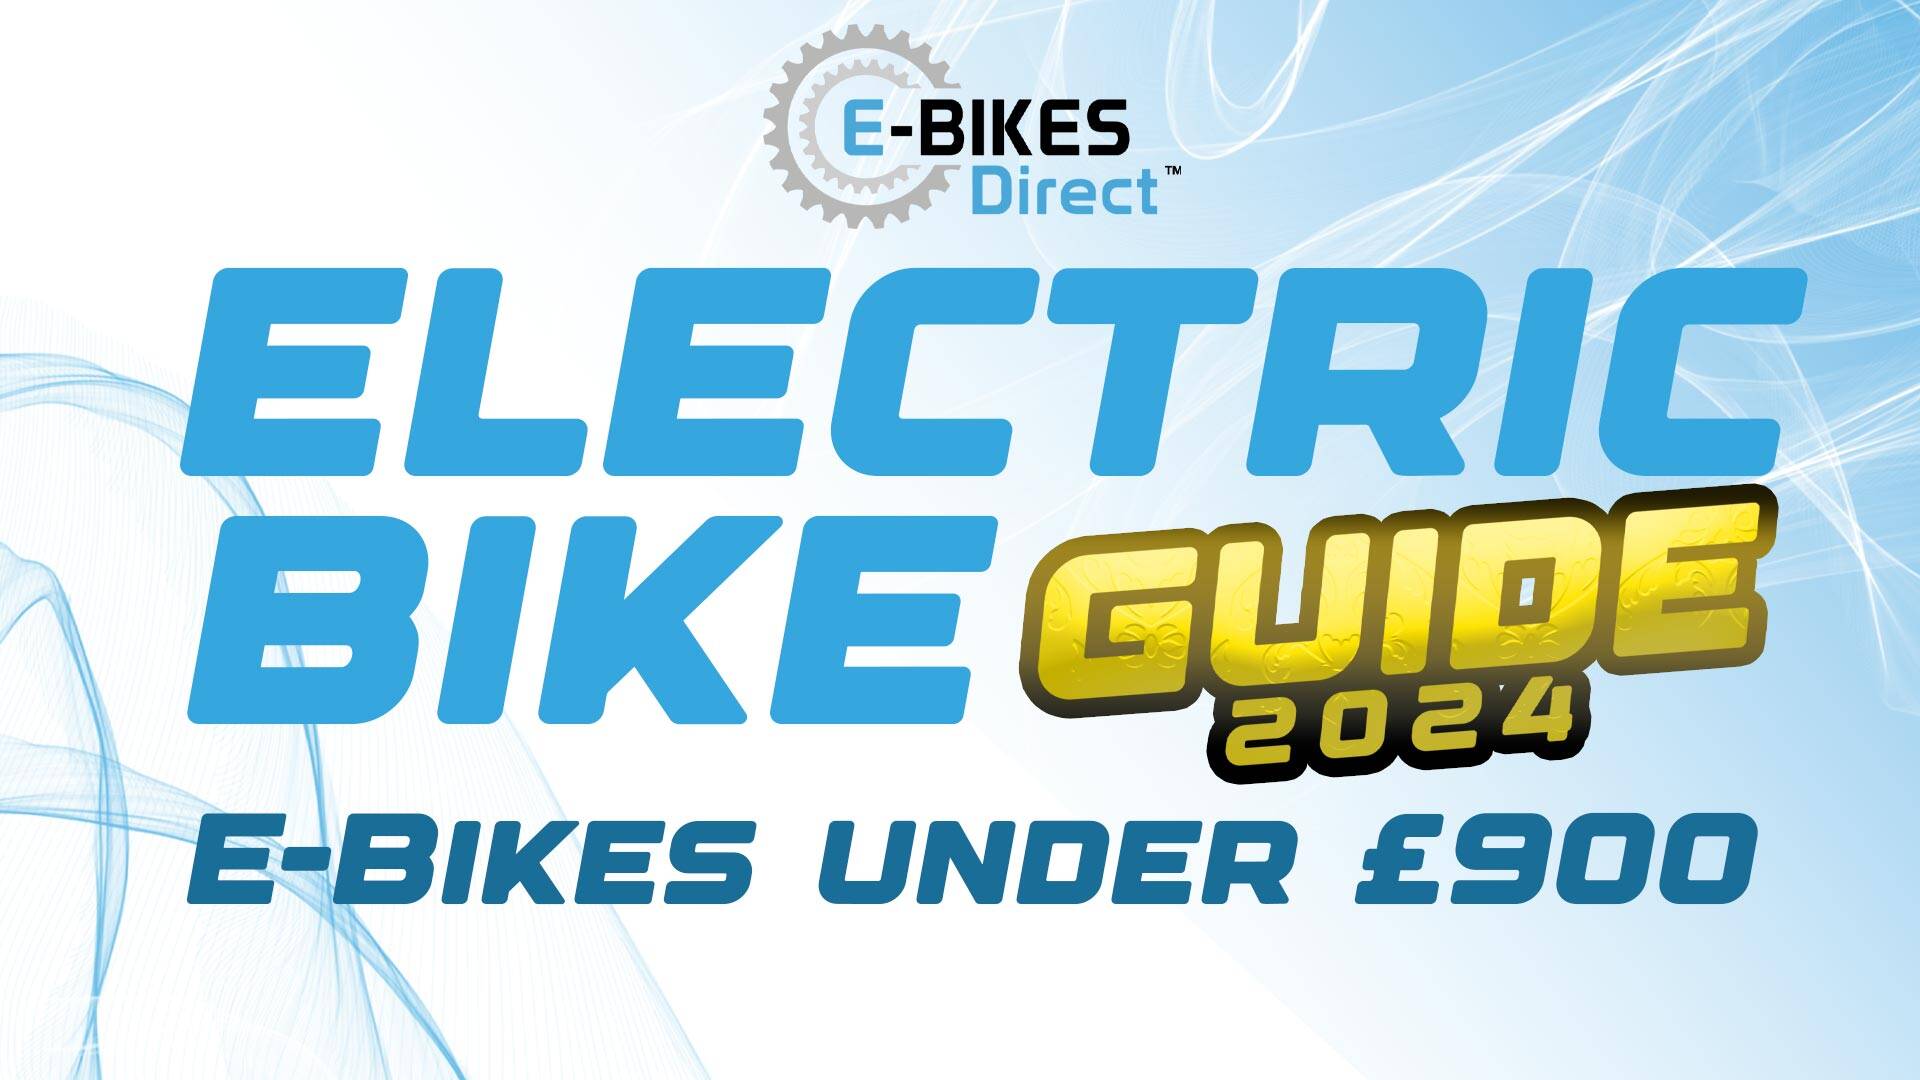 Electric Bikes Under £900 - a blog by E-Bikes Direct